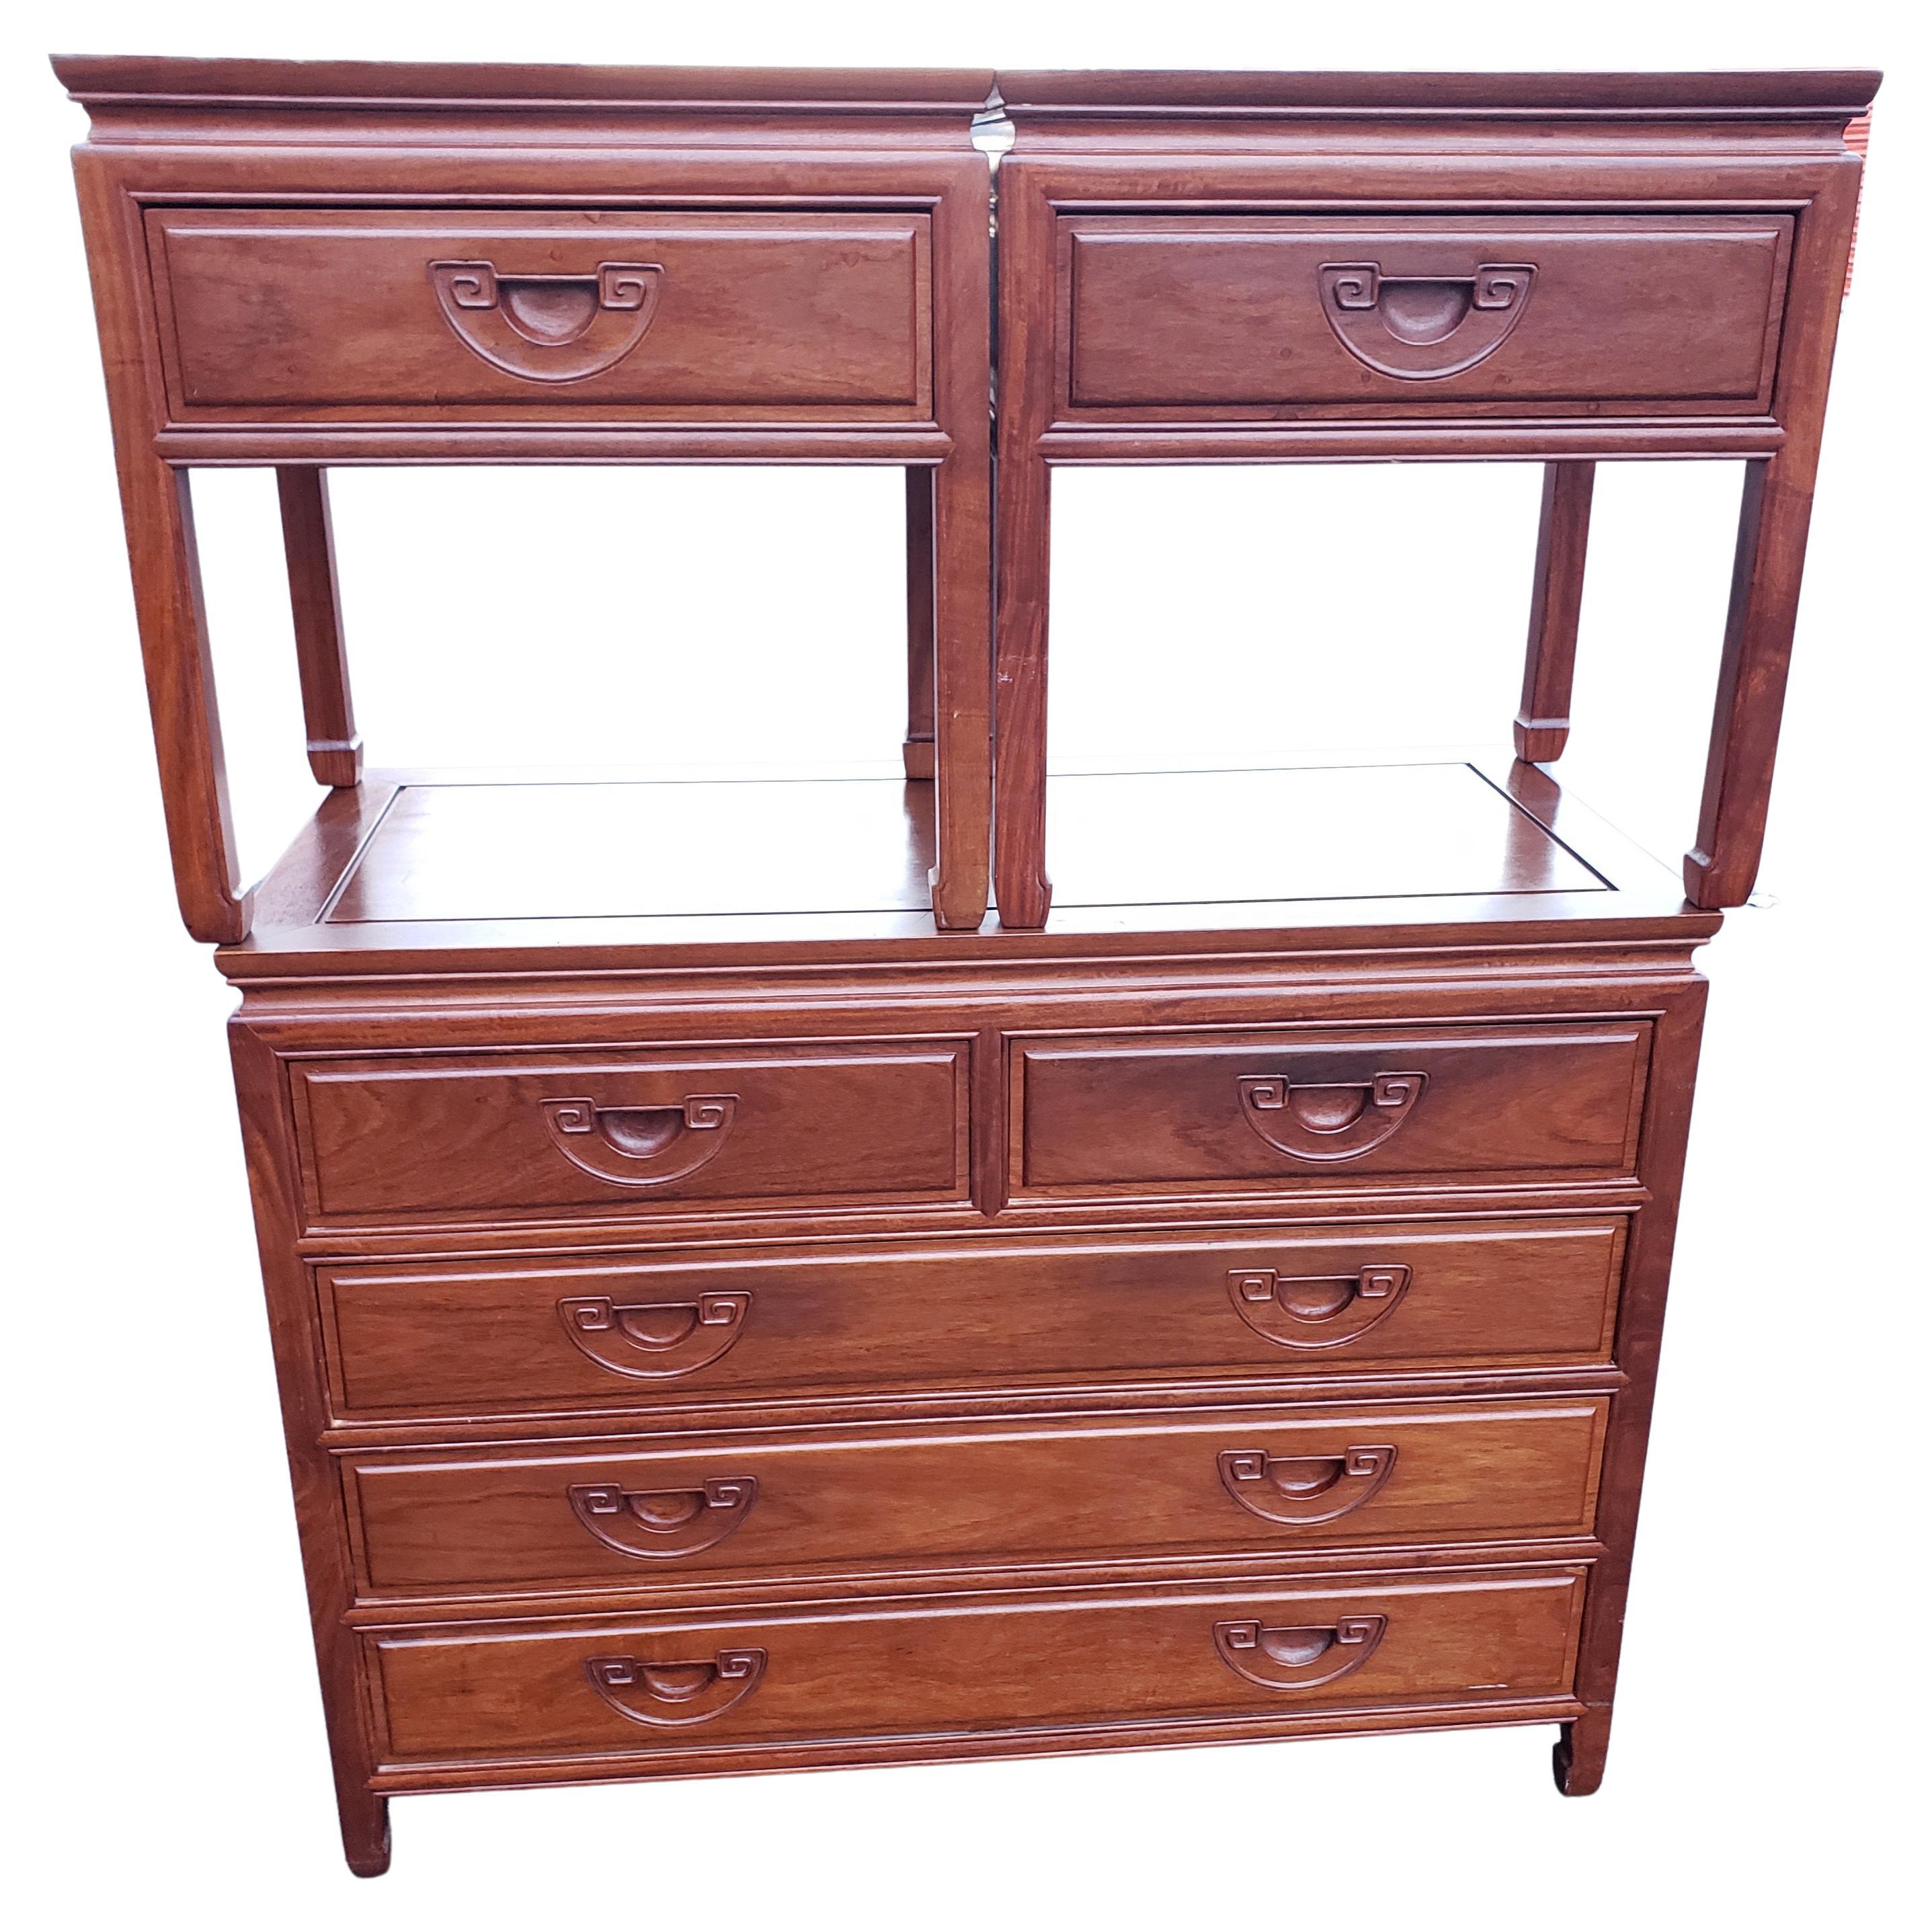 George Zee rosewood hand crafted commode / dresser / chest of drawers and side tables with integrated carved handles. Very good condition. All dovetailed drawers. Finished on all sides, inside out. 
Measurements: chest of drawers 42